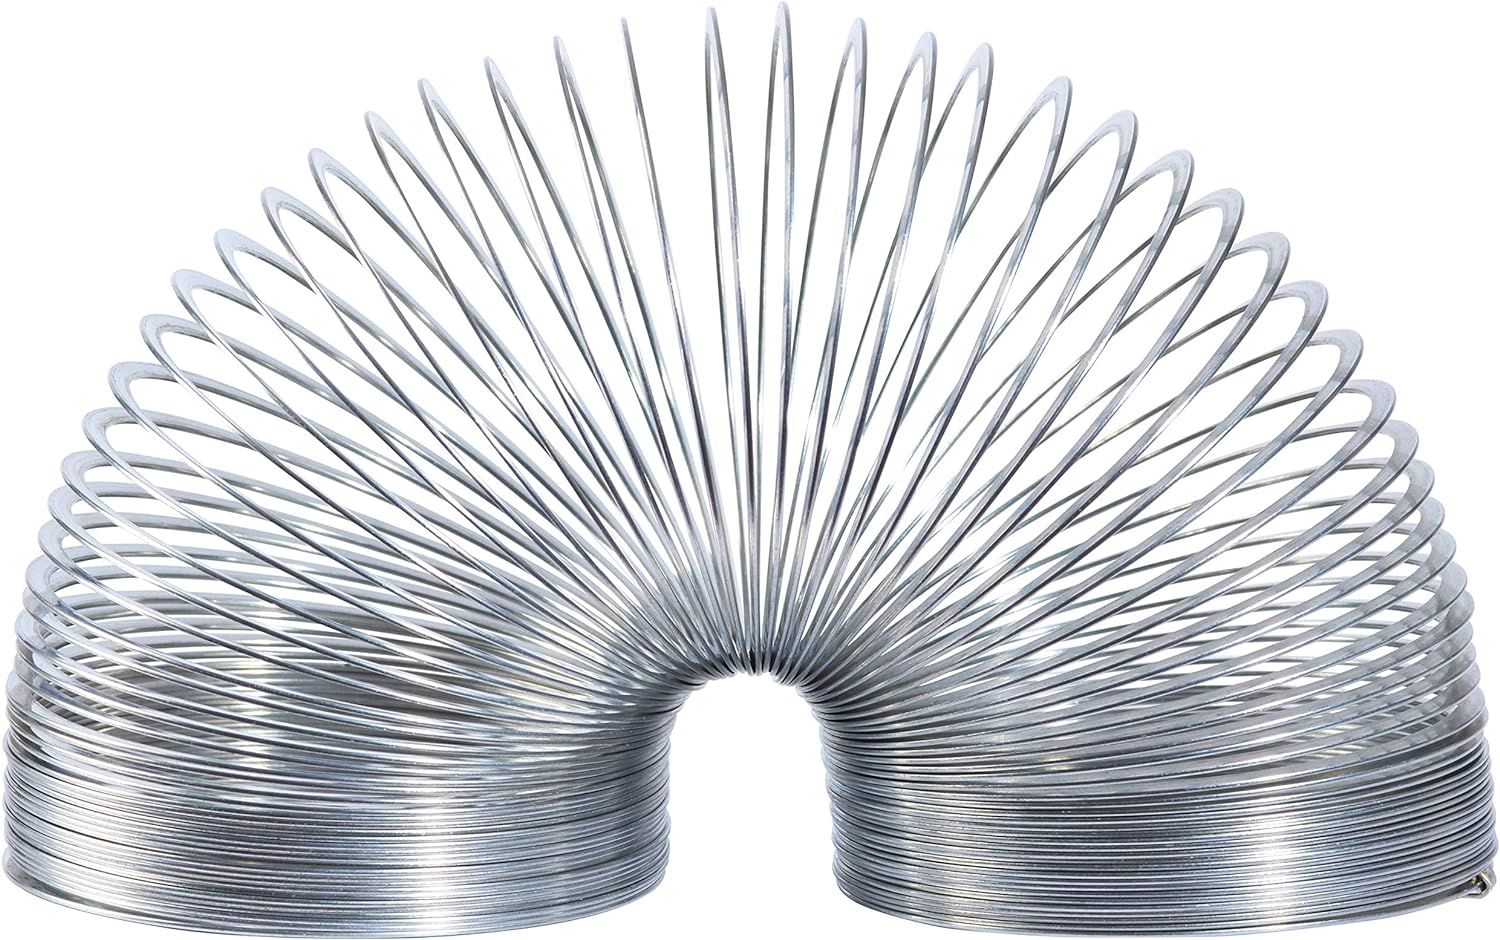 Just Play The Original Slinky Walking Spring Toy, Metal Slinky, Fidget Toys, Kids Toys for Ages 5... | Amazon (US)